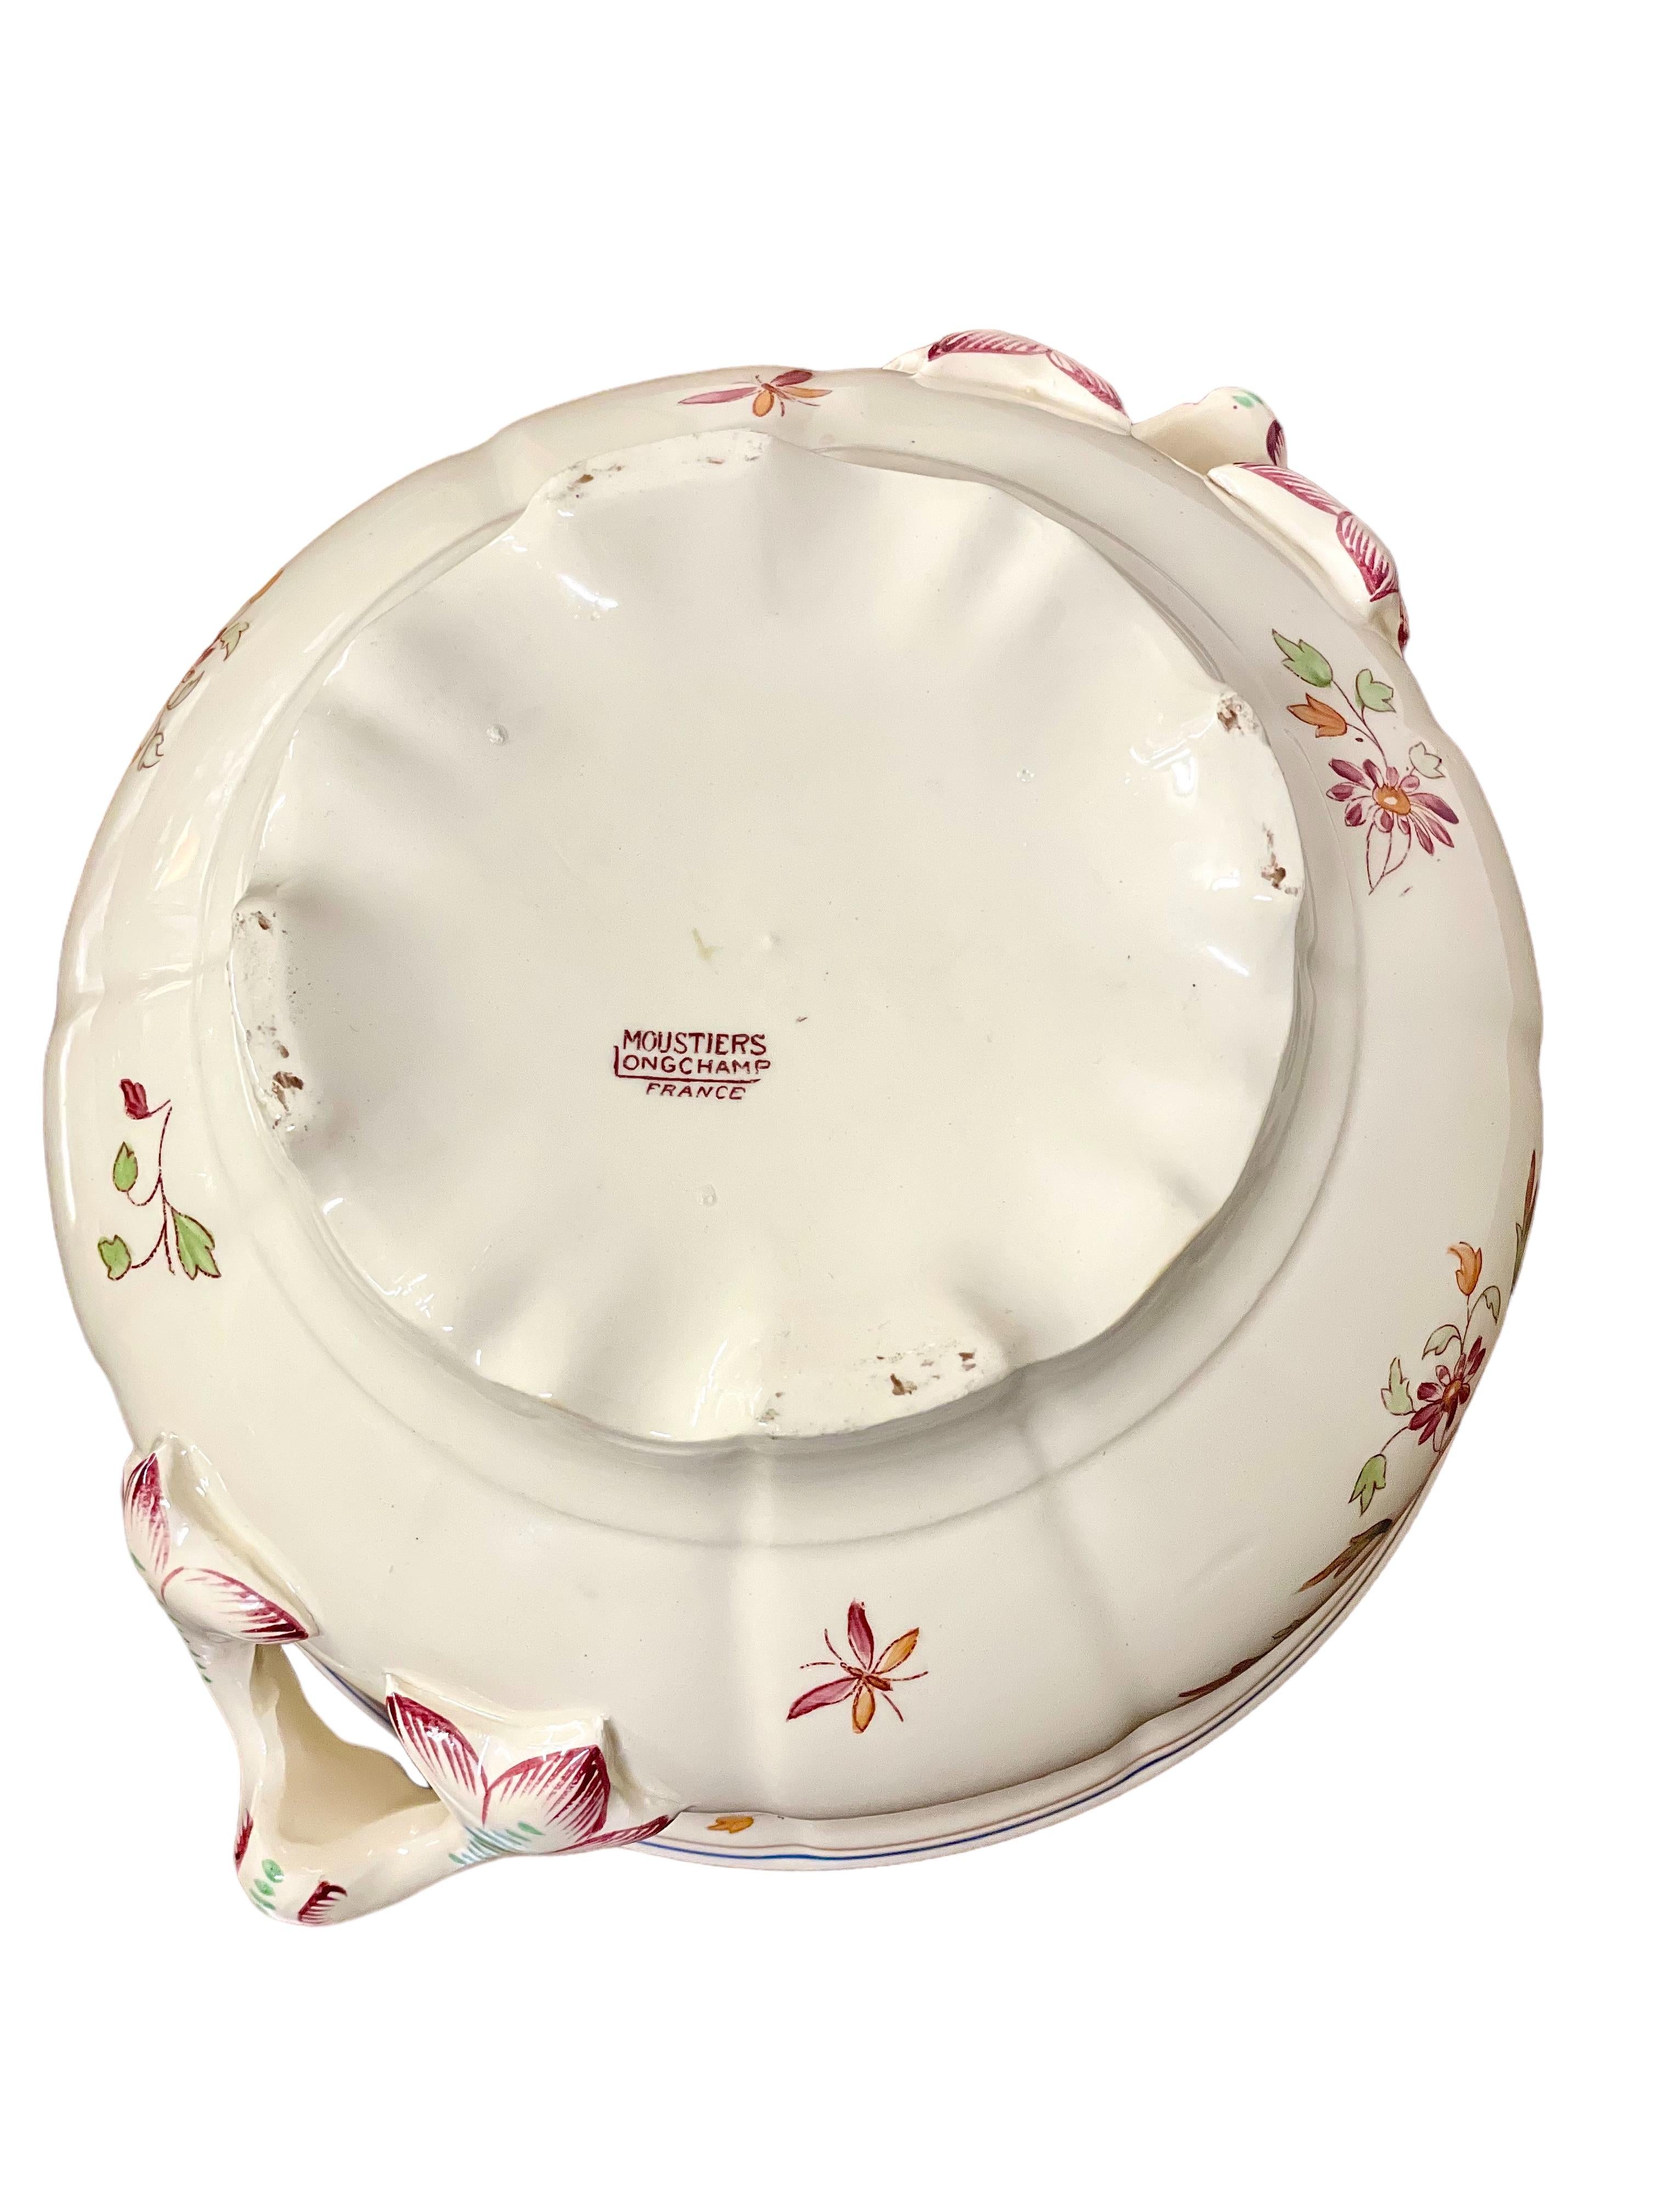 Moustiers by Longchamp French Faience Dinner Service for 12  For Sale 5